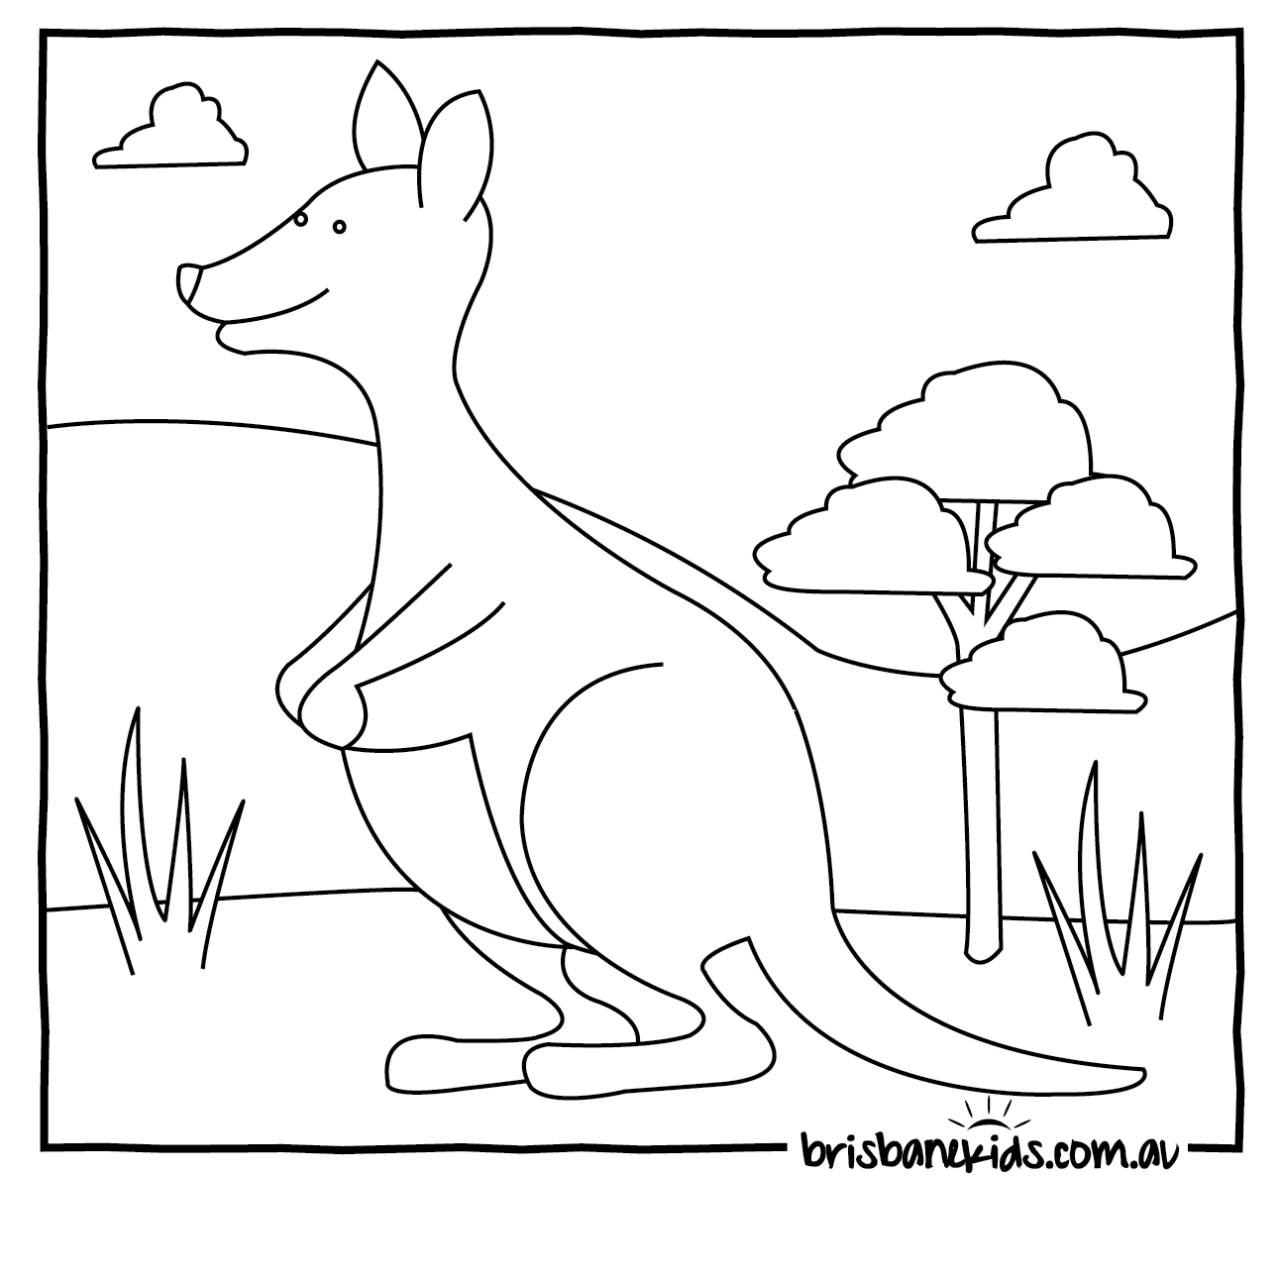 Kangaroo Coloring Pages For Kids